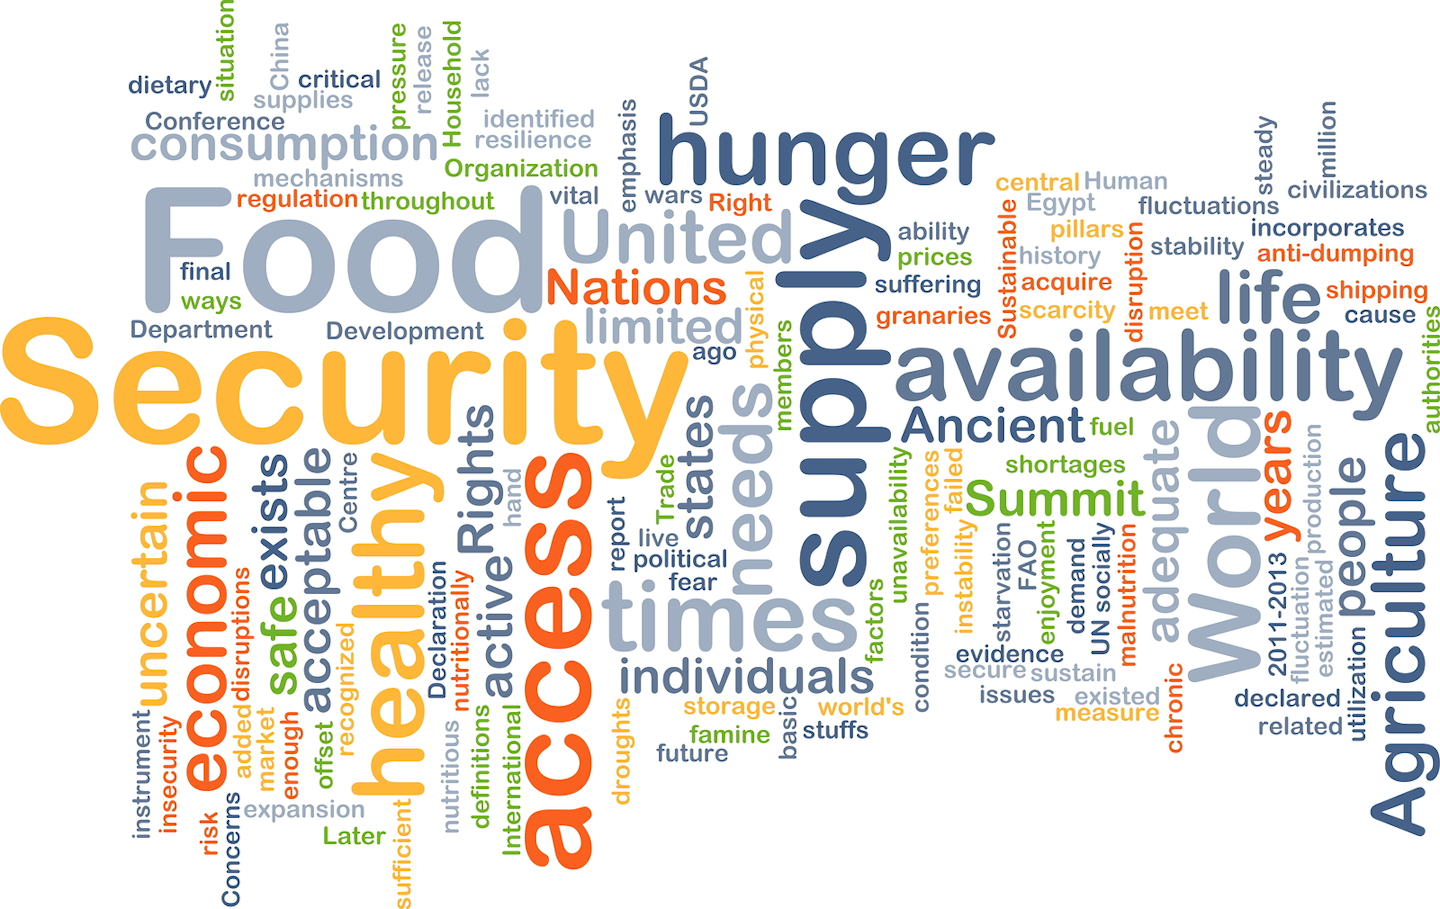 Treating Food Insecurity as a Clinical Gap in Care | Healthcare Innovation